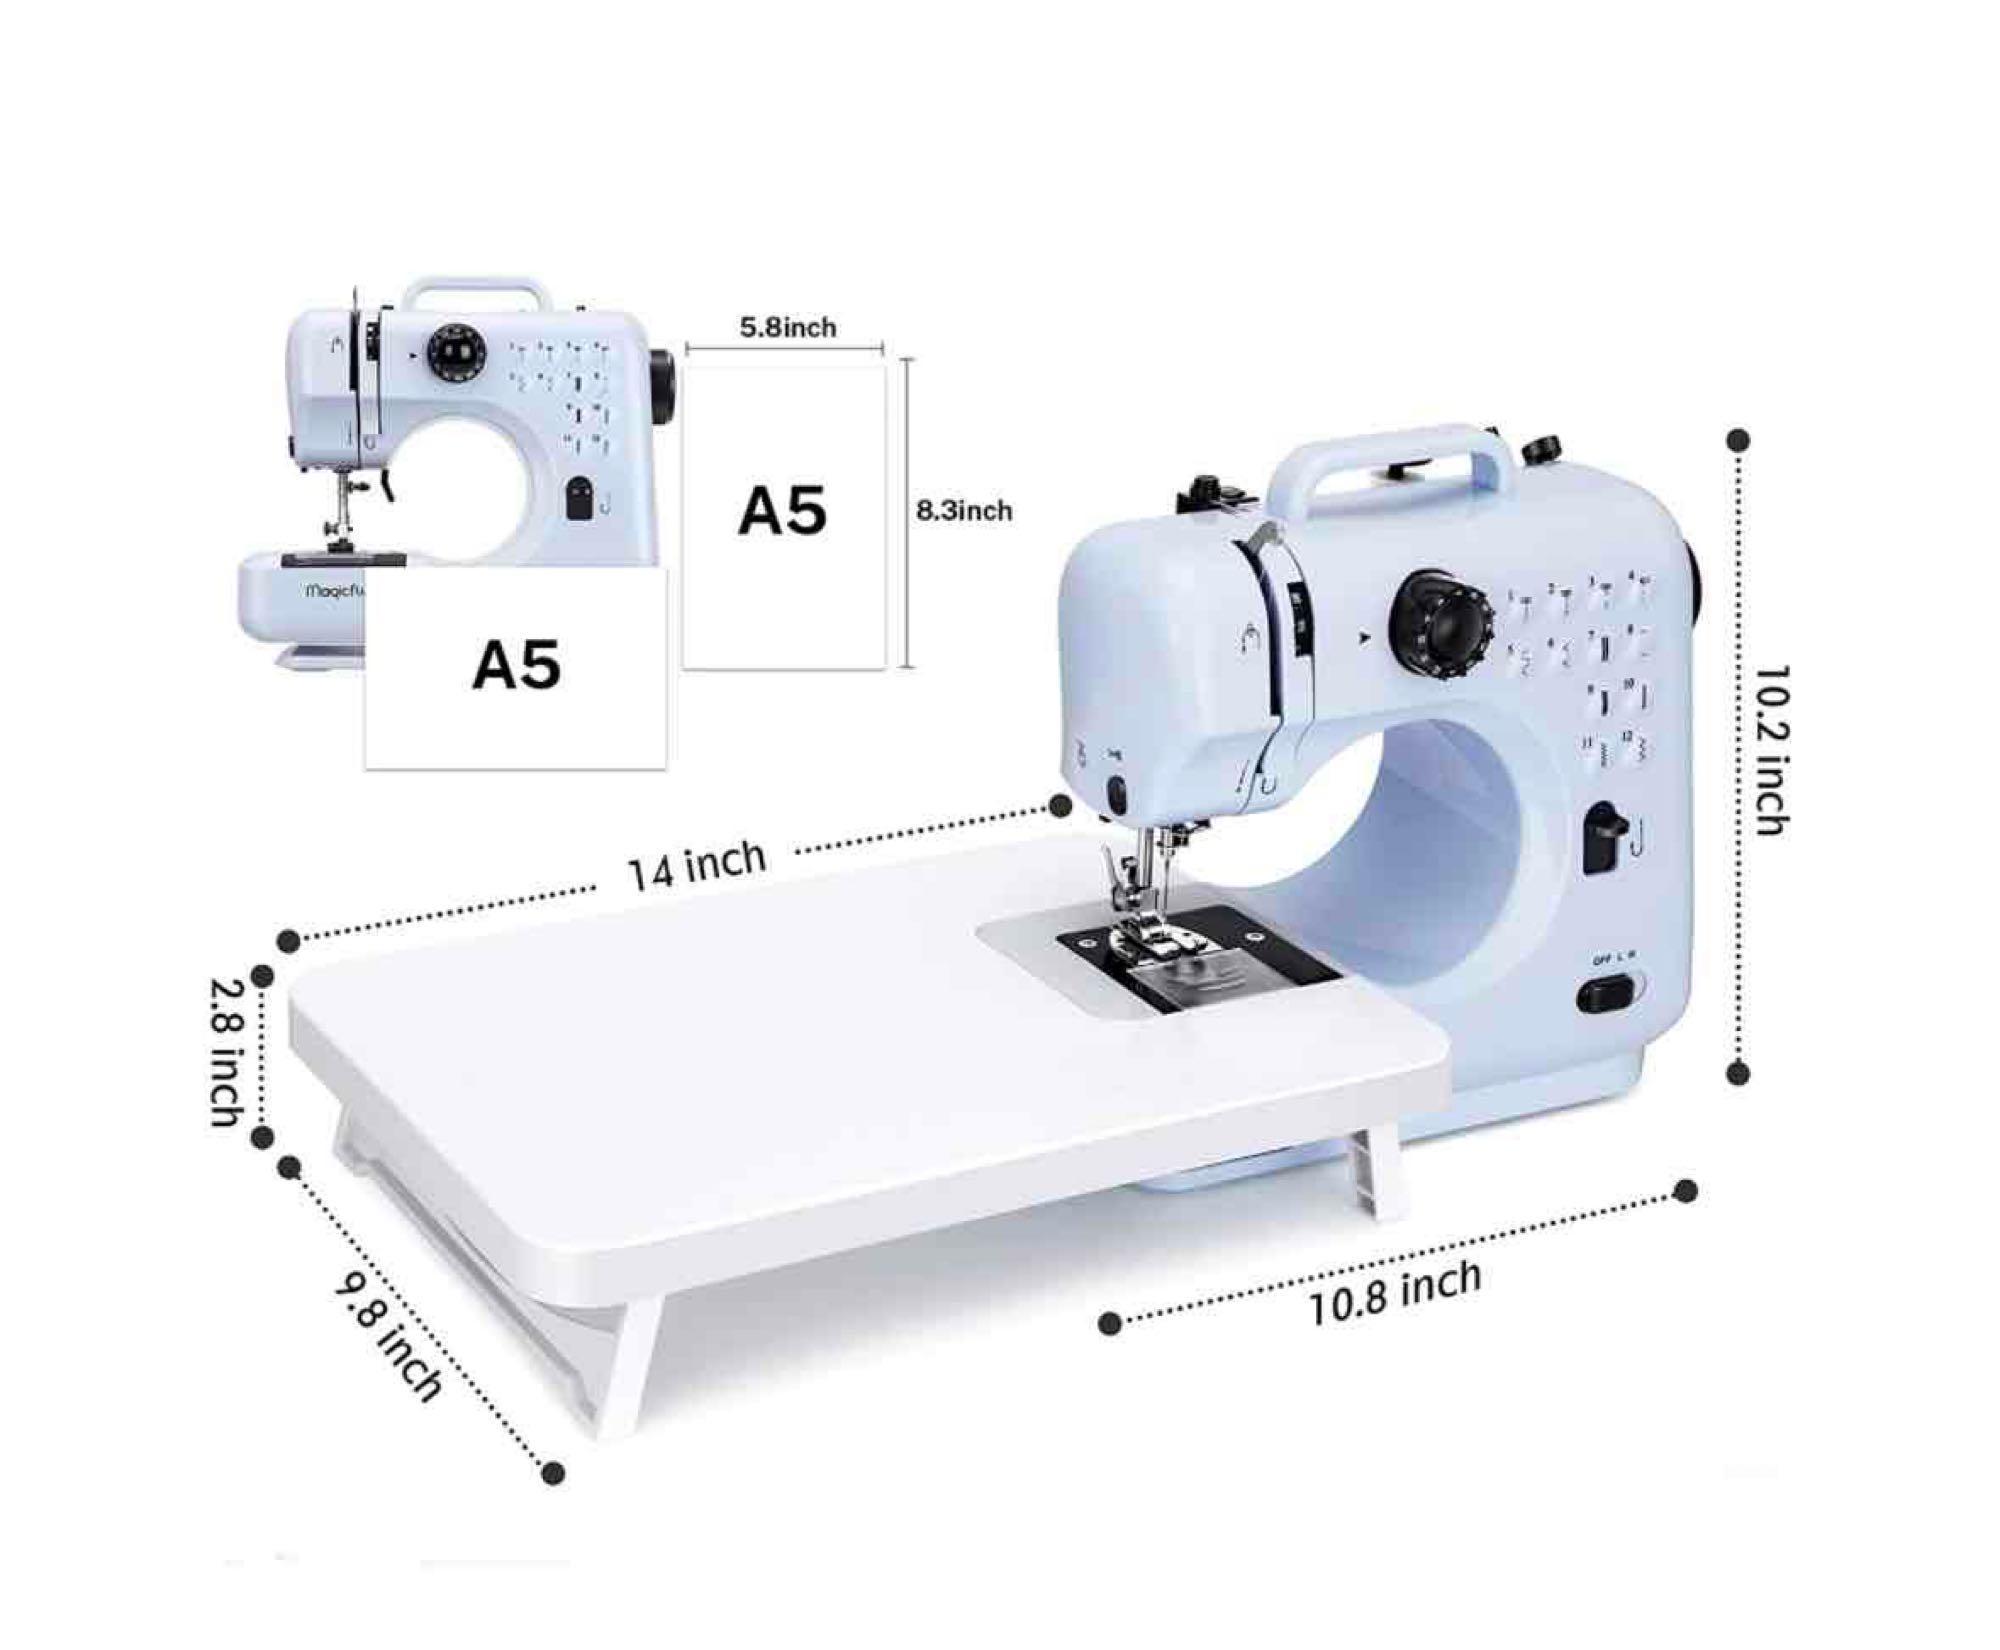 MiniaPortableaSewingaMachine Magicfly Mini Sewing Machine for